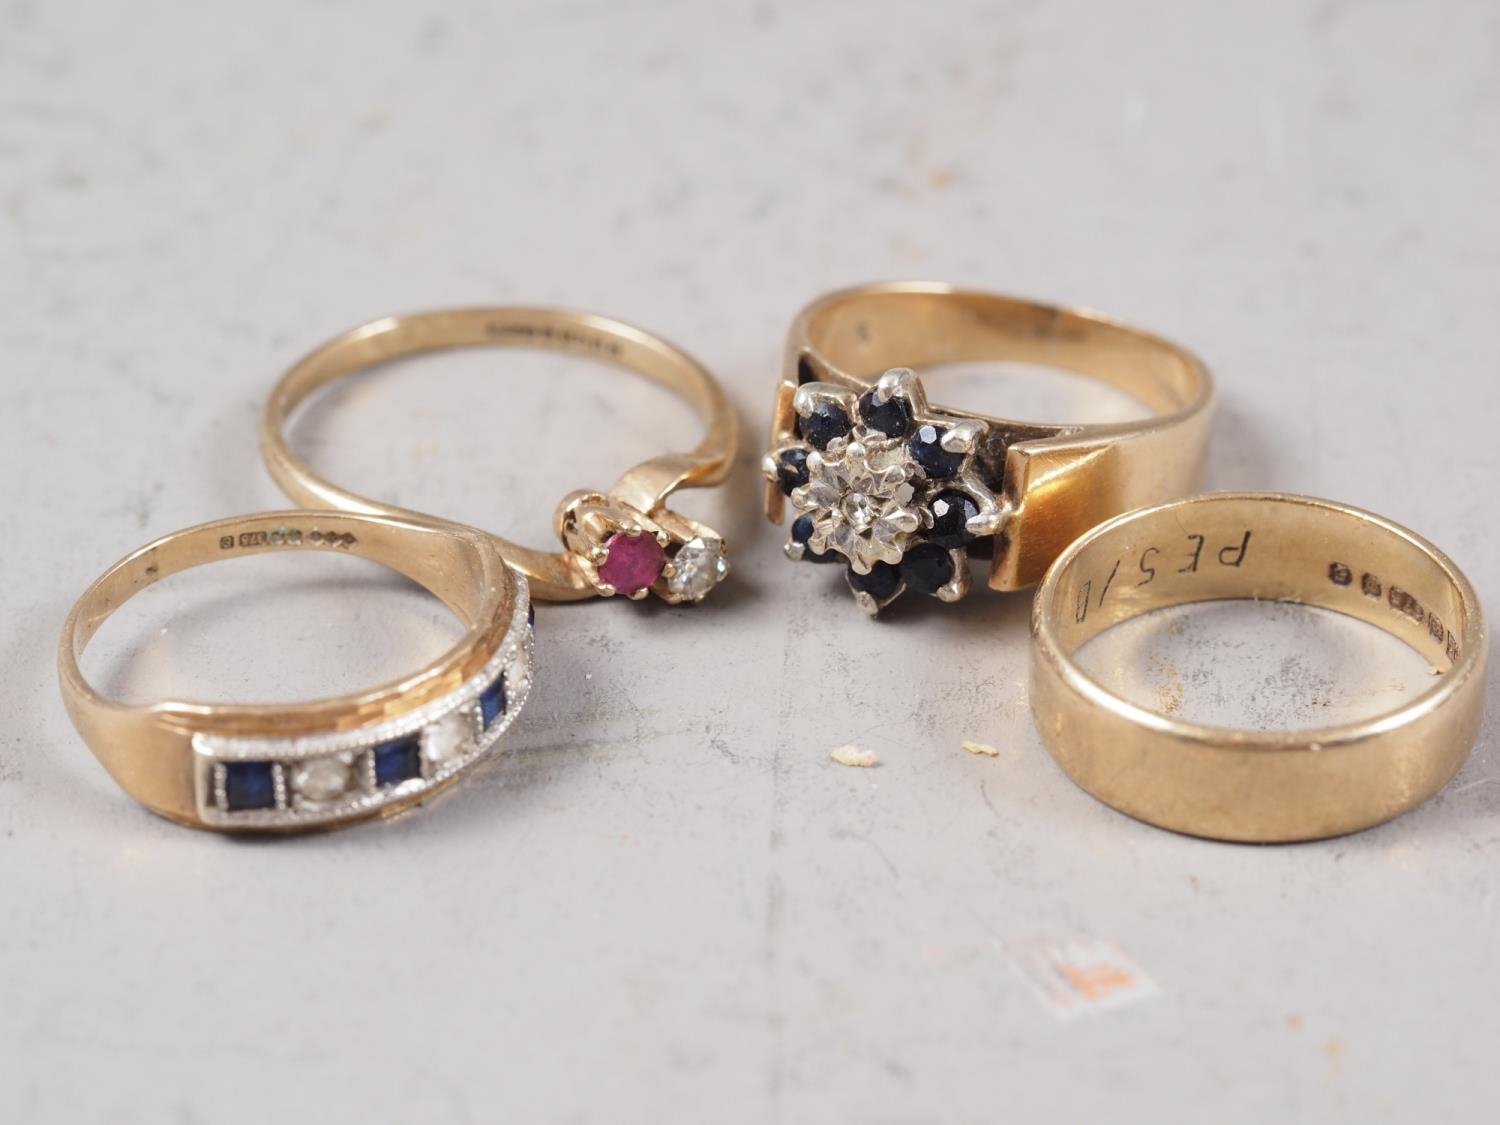 A 9ct gold, diamond and sapphire dress ring, size J, 1.9g, a 9ct gold, diamond and ruby crossover